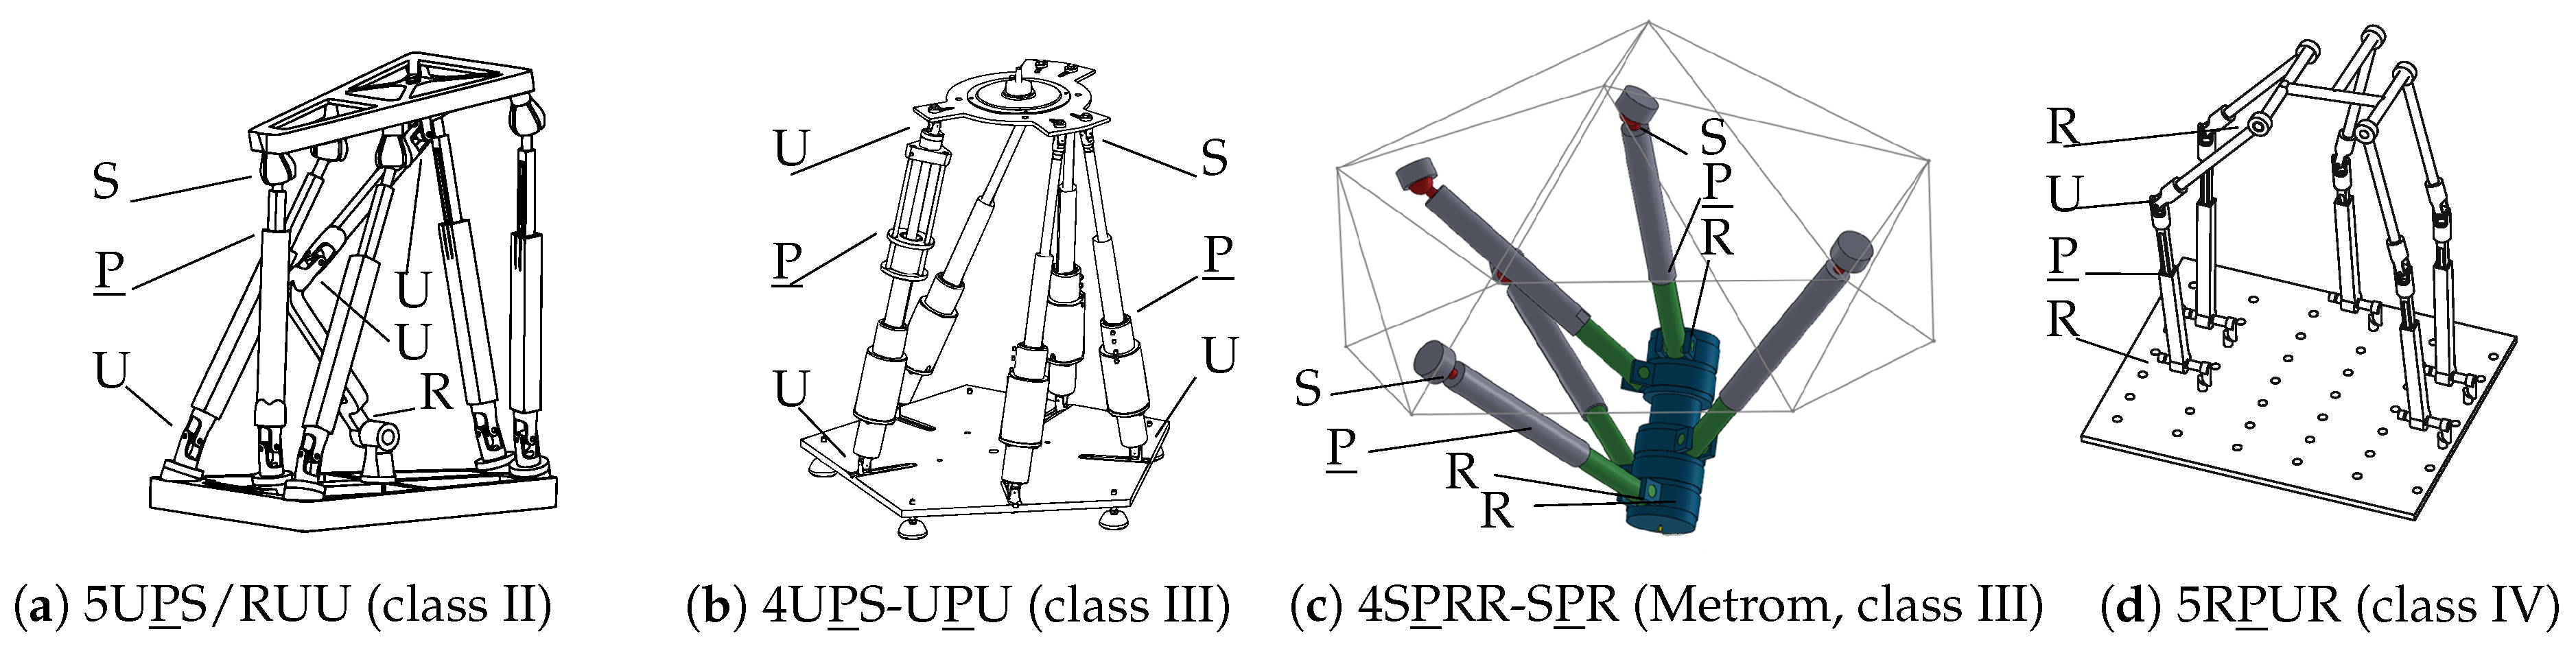 Robotics | Free Full-Text | Modeling Parallel Robot Kinematics for 3T2R and  3T3R Tasks Using Reciprocal Sets of Euler Angles